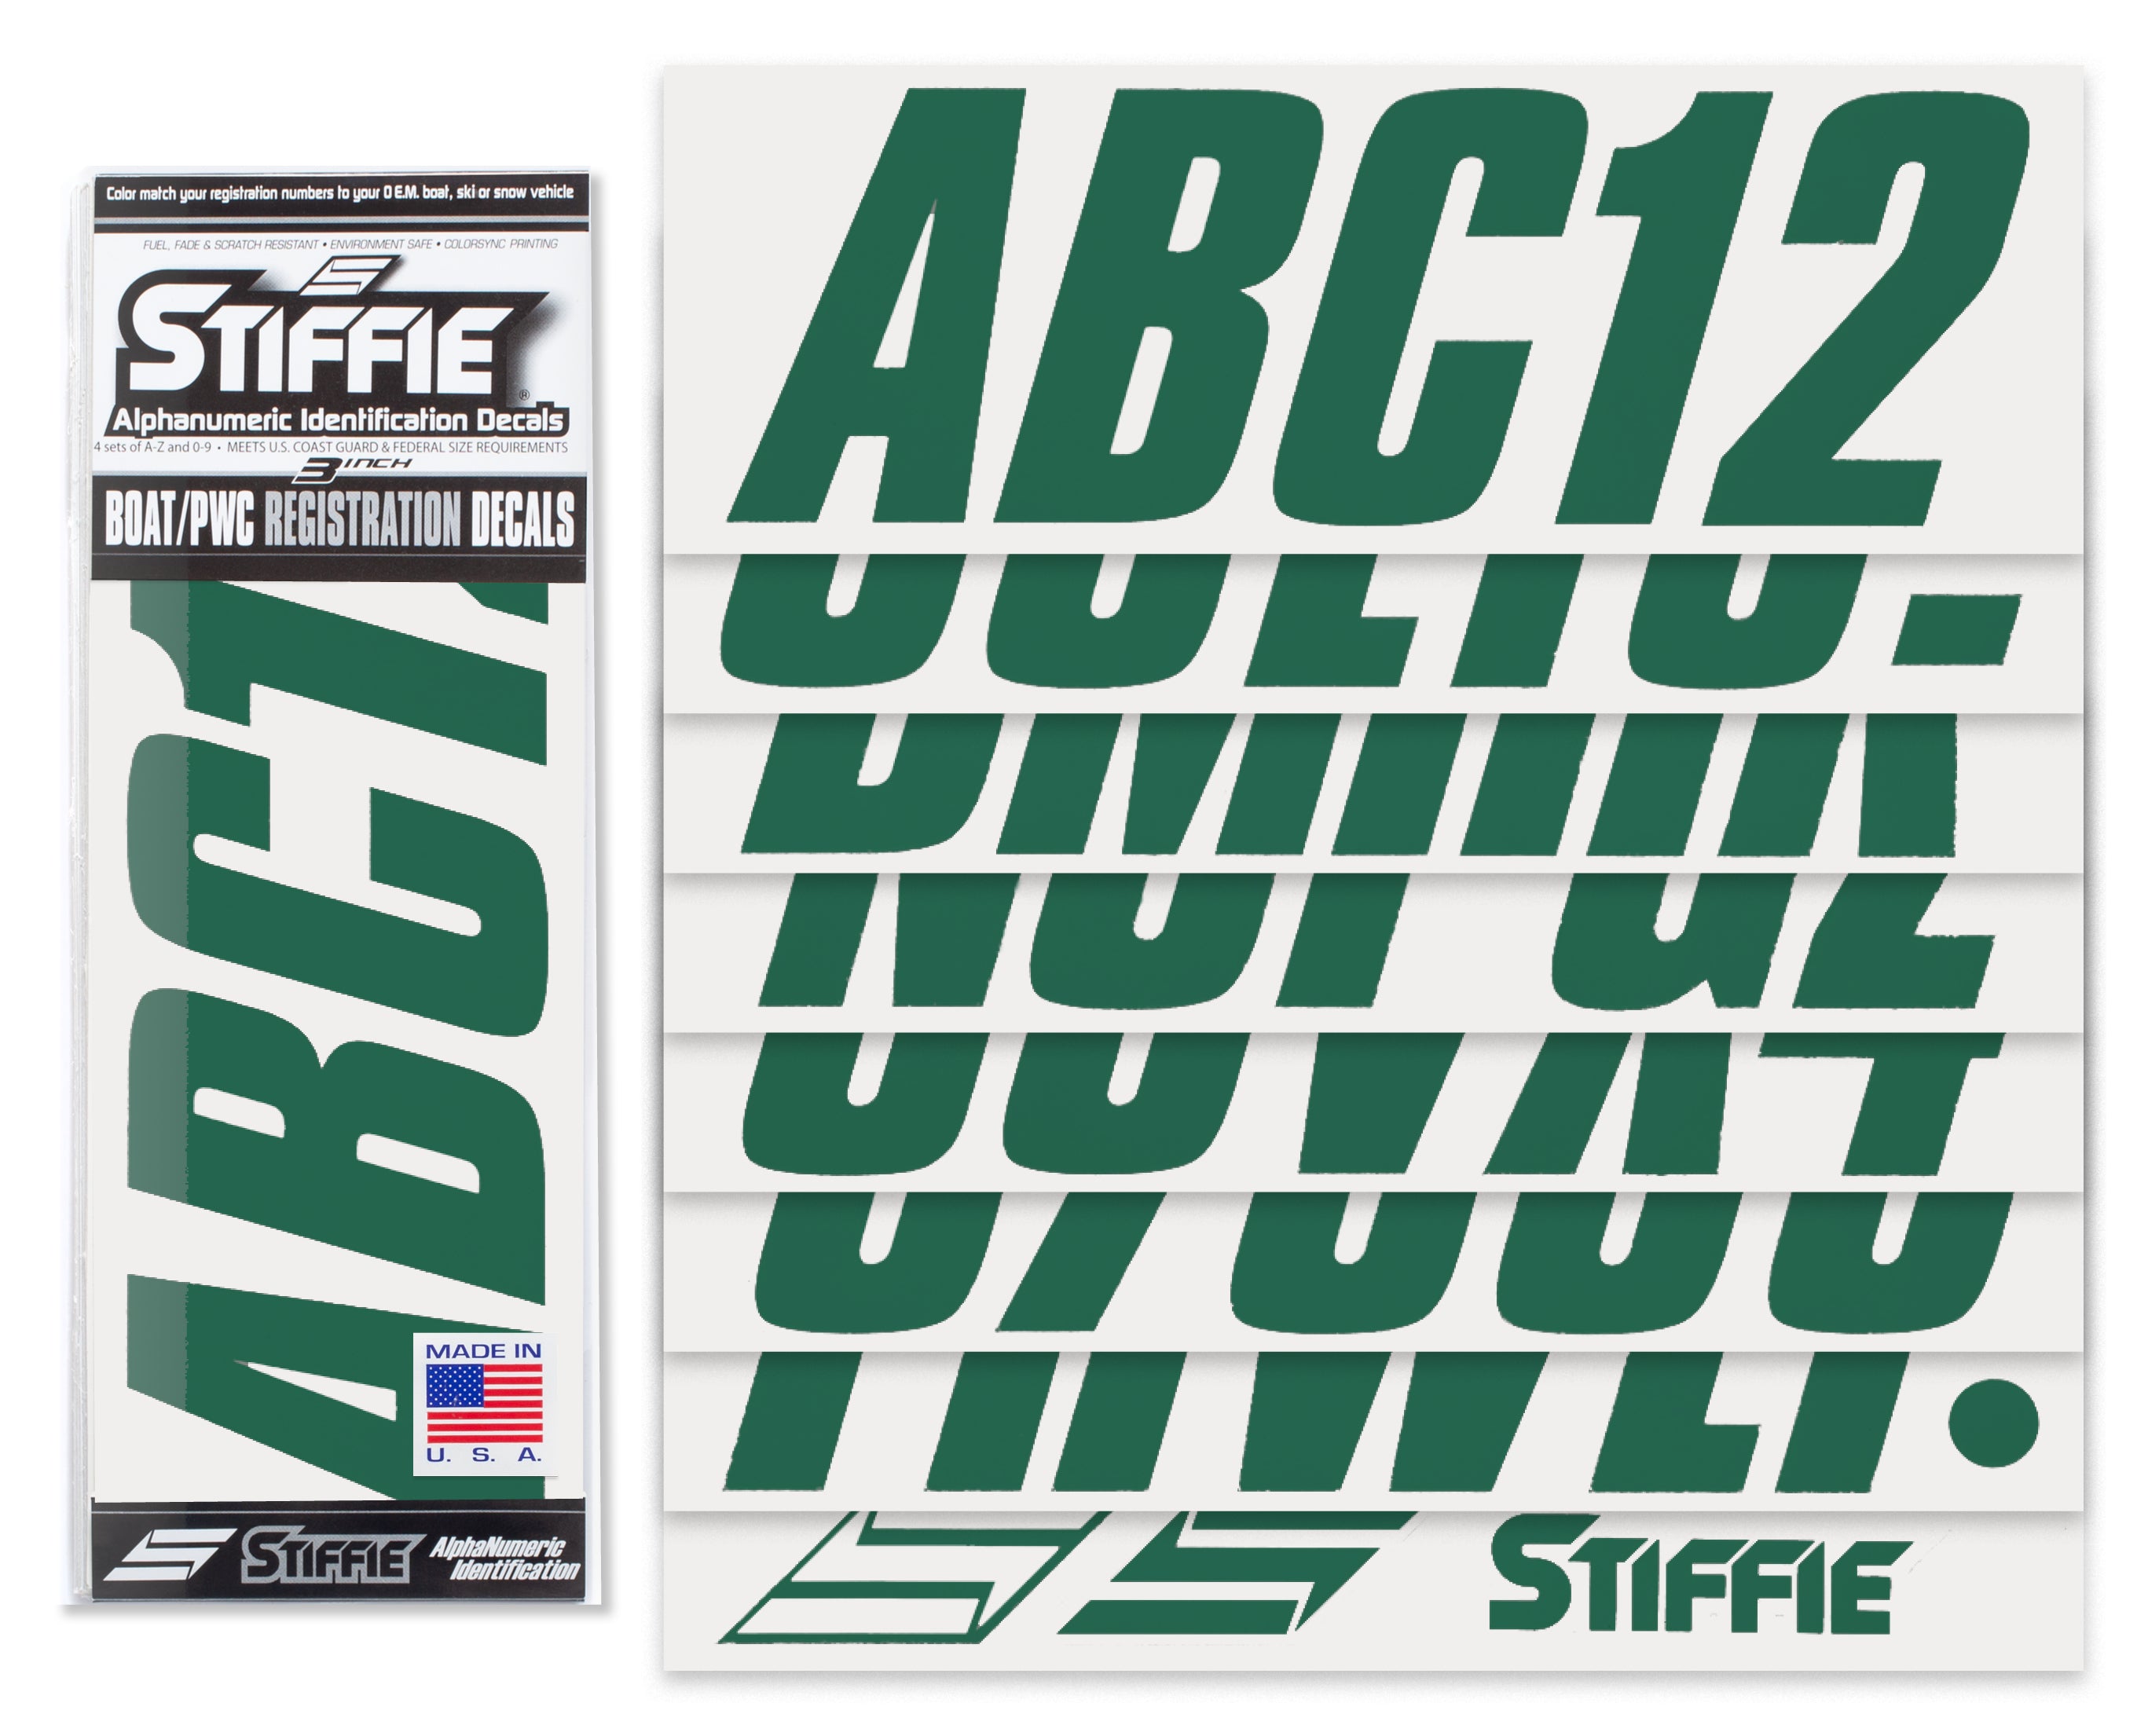 STIFFIE Shift Racing Green 3" ID Kit Alpha-Numeric Registration Identification Numbers Stickers Decals for Boats & Personal Watercraft